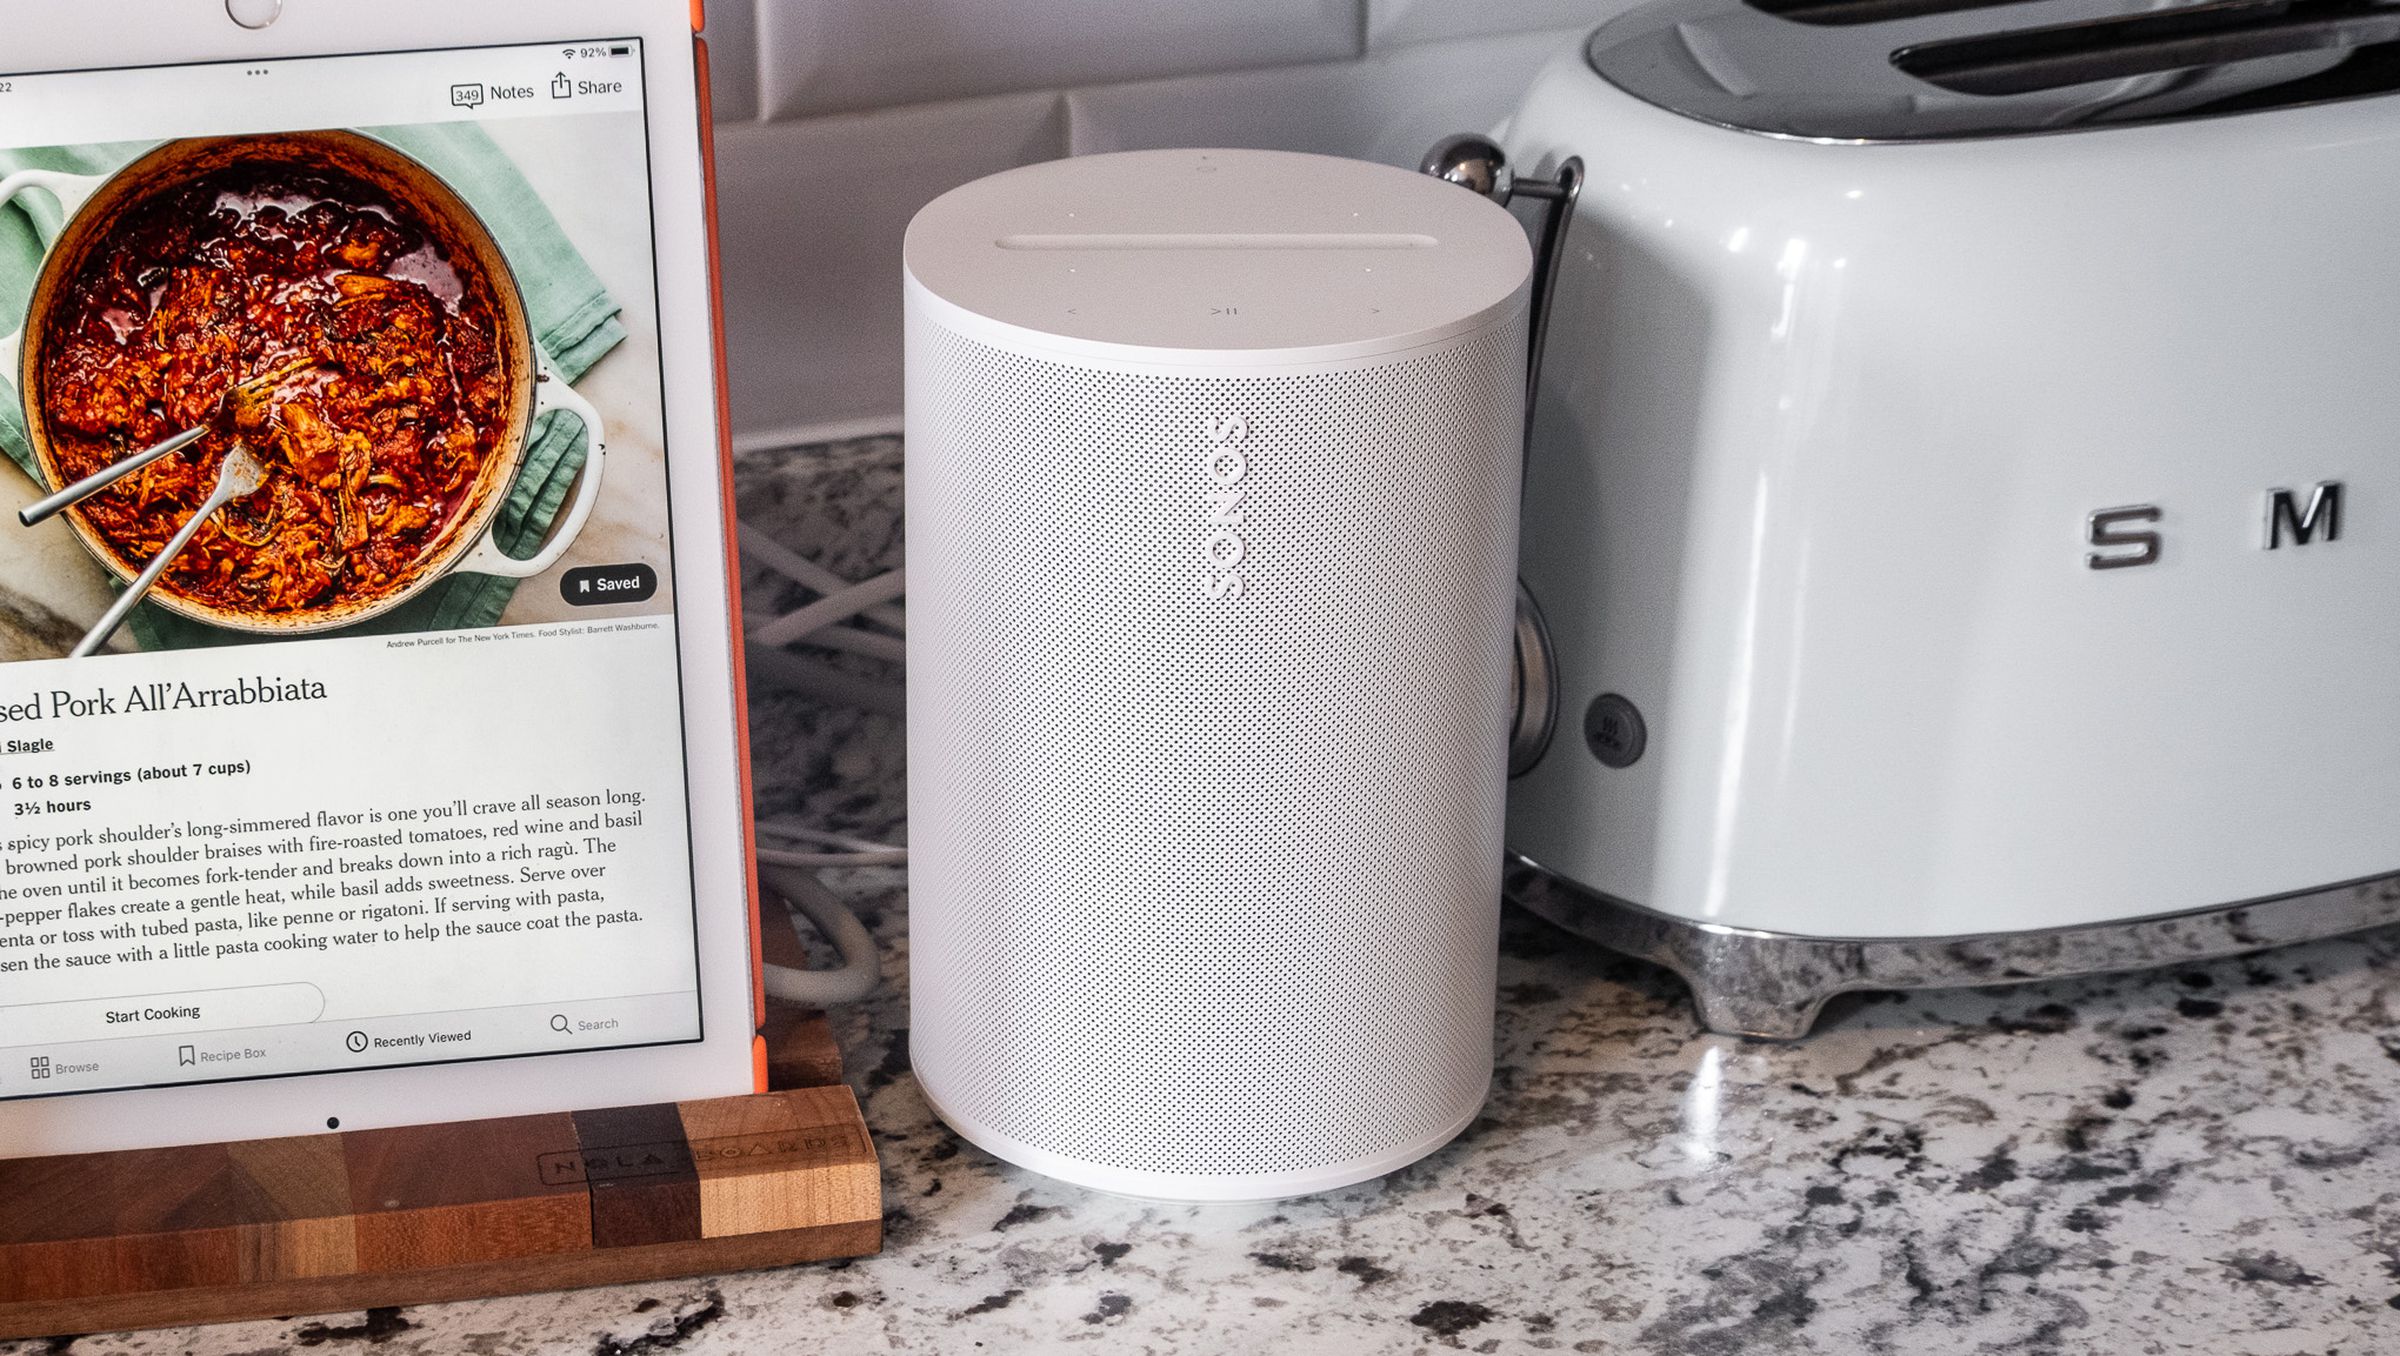 A photo of the Sonos Era 100 speaker in a kitchen setting beside an iPad and toaster.